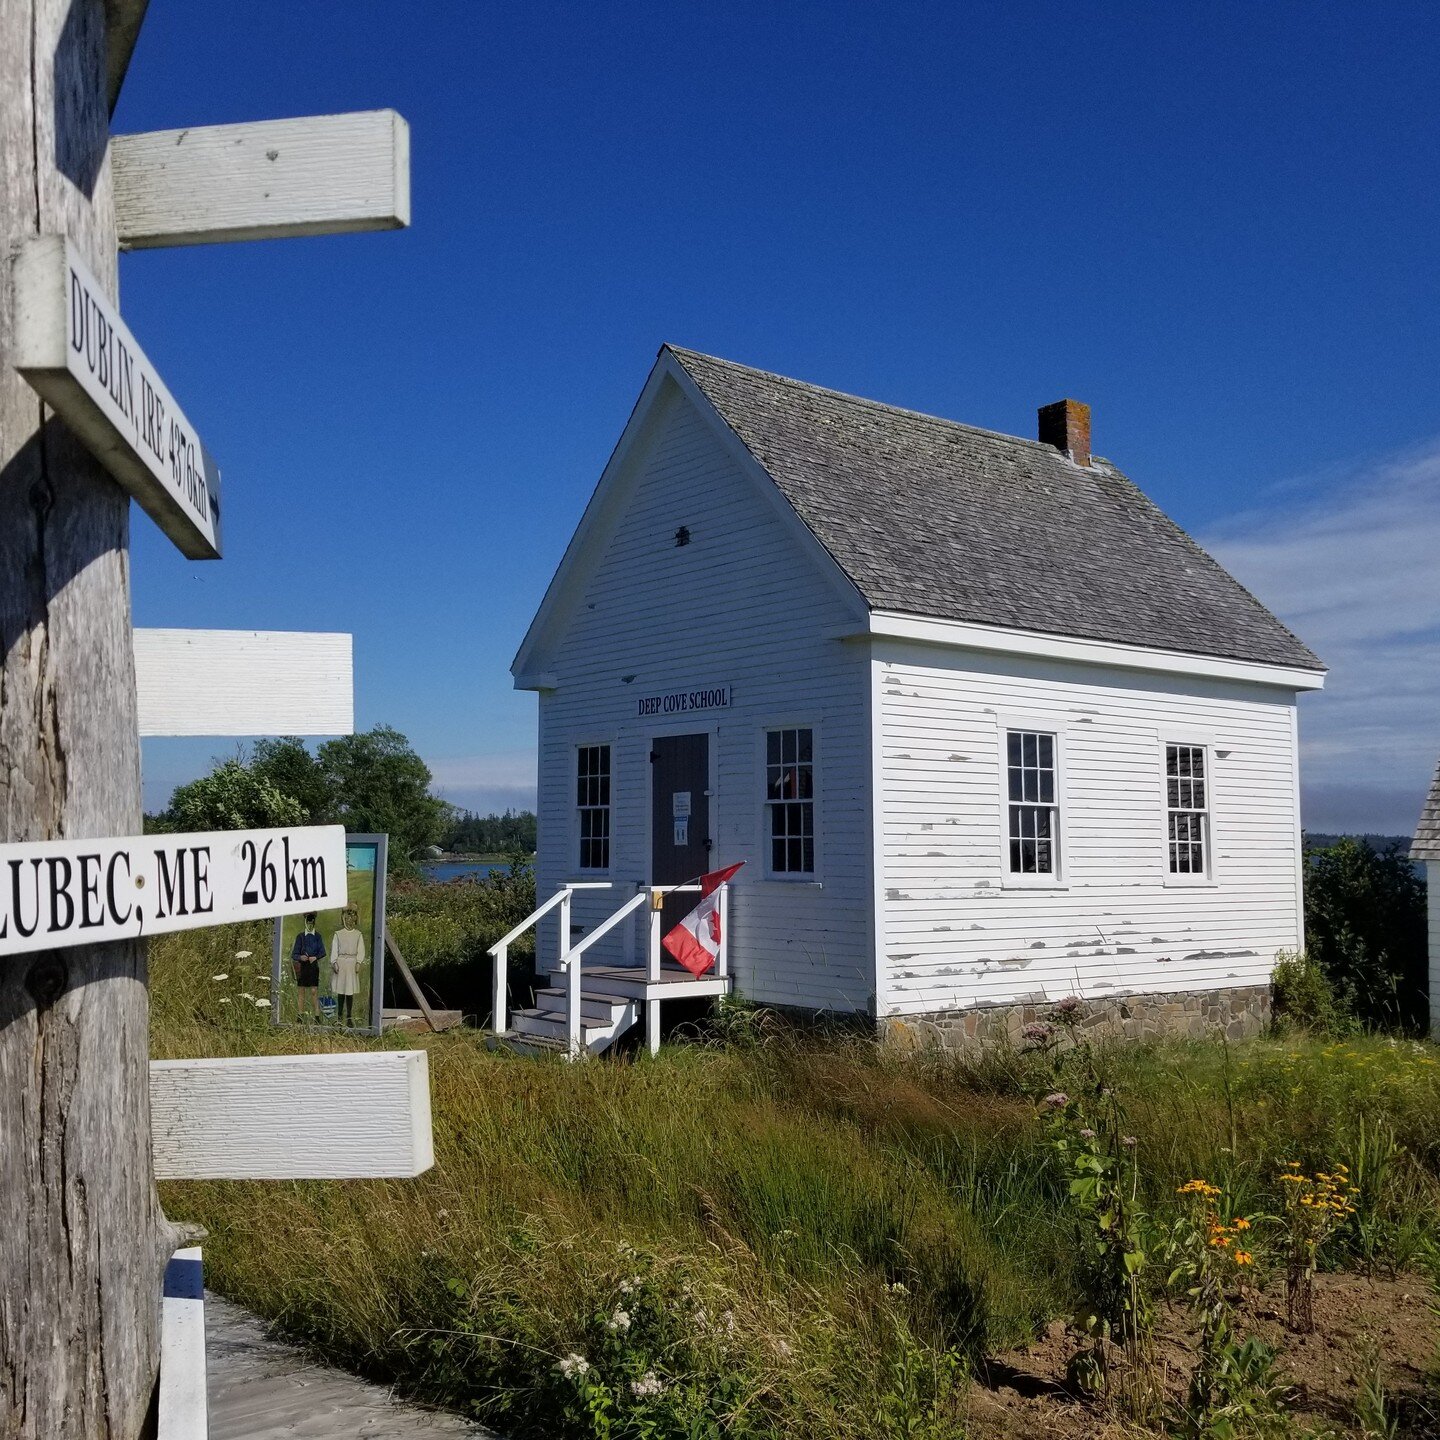 When on #GrandMananIsland, do not miss the Grand Manan Museum! Full of heritage and history, this amazing treasure trove is truly worth a visit, and take a walk at the back of the building too! 

#grandmananisland #explorenb #newbrunswick #grandmanan